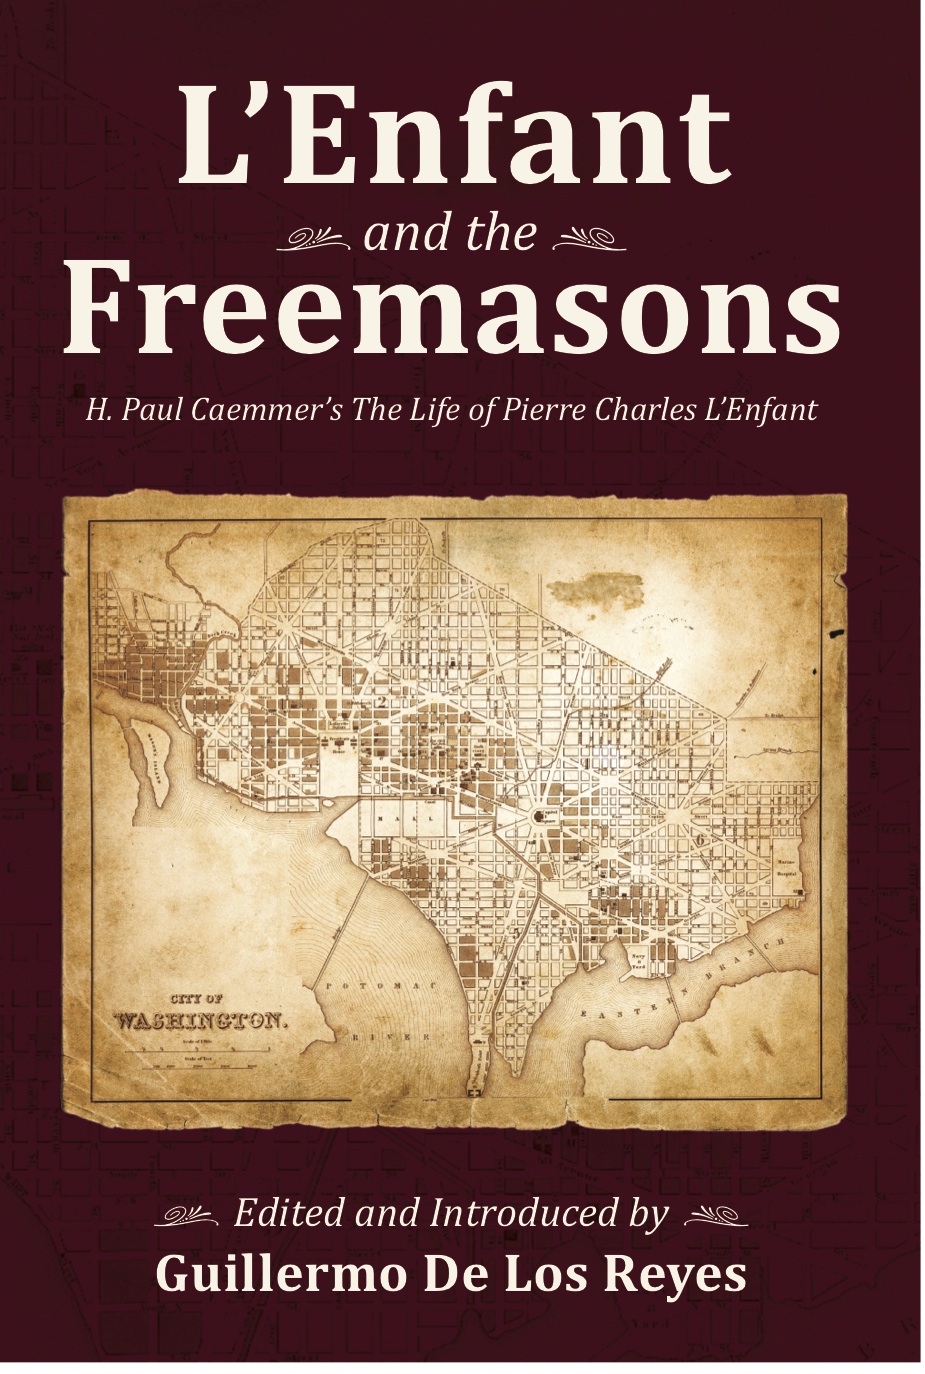 L’Enfant and the Freemasons: H. Paul Caemmer’s The Life of Pierre Charles L’Enfant